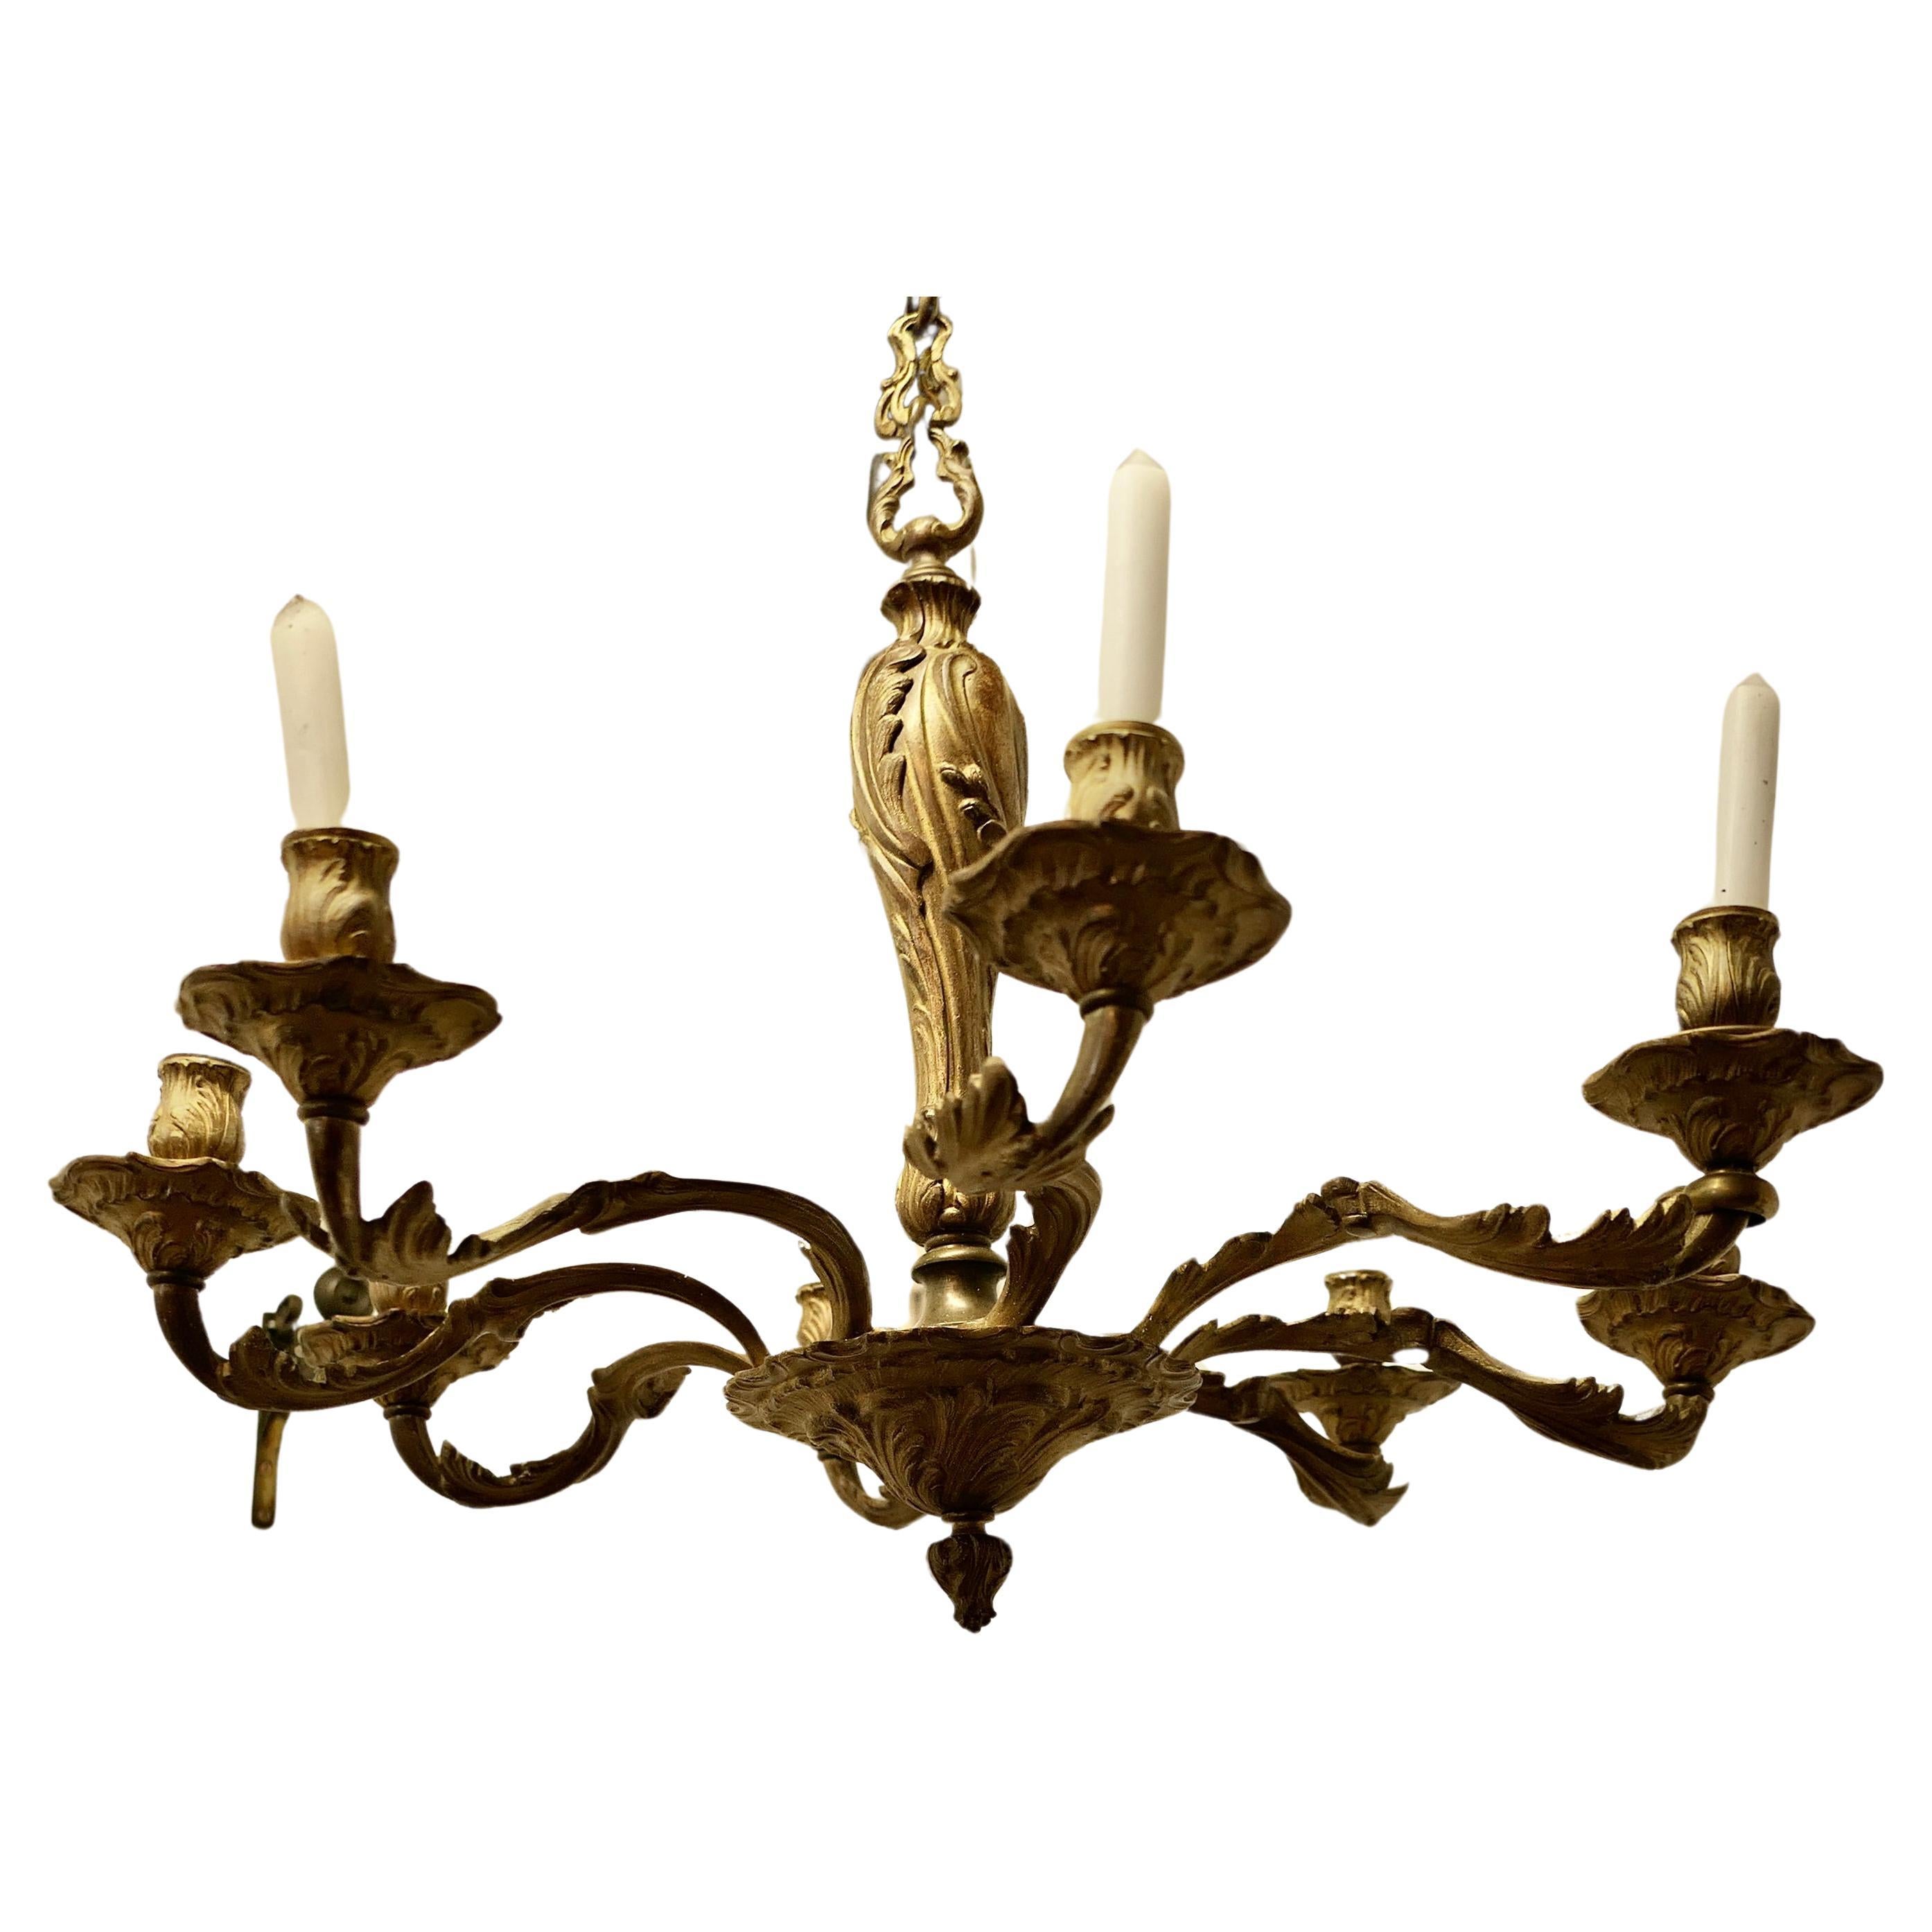 A French Gilded Brass 8 Branch Rococo Chandelier (Candelier)  